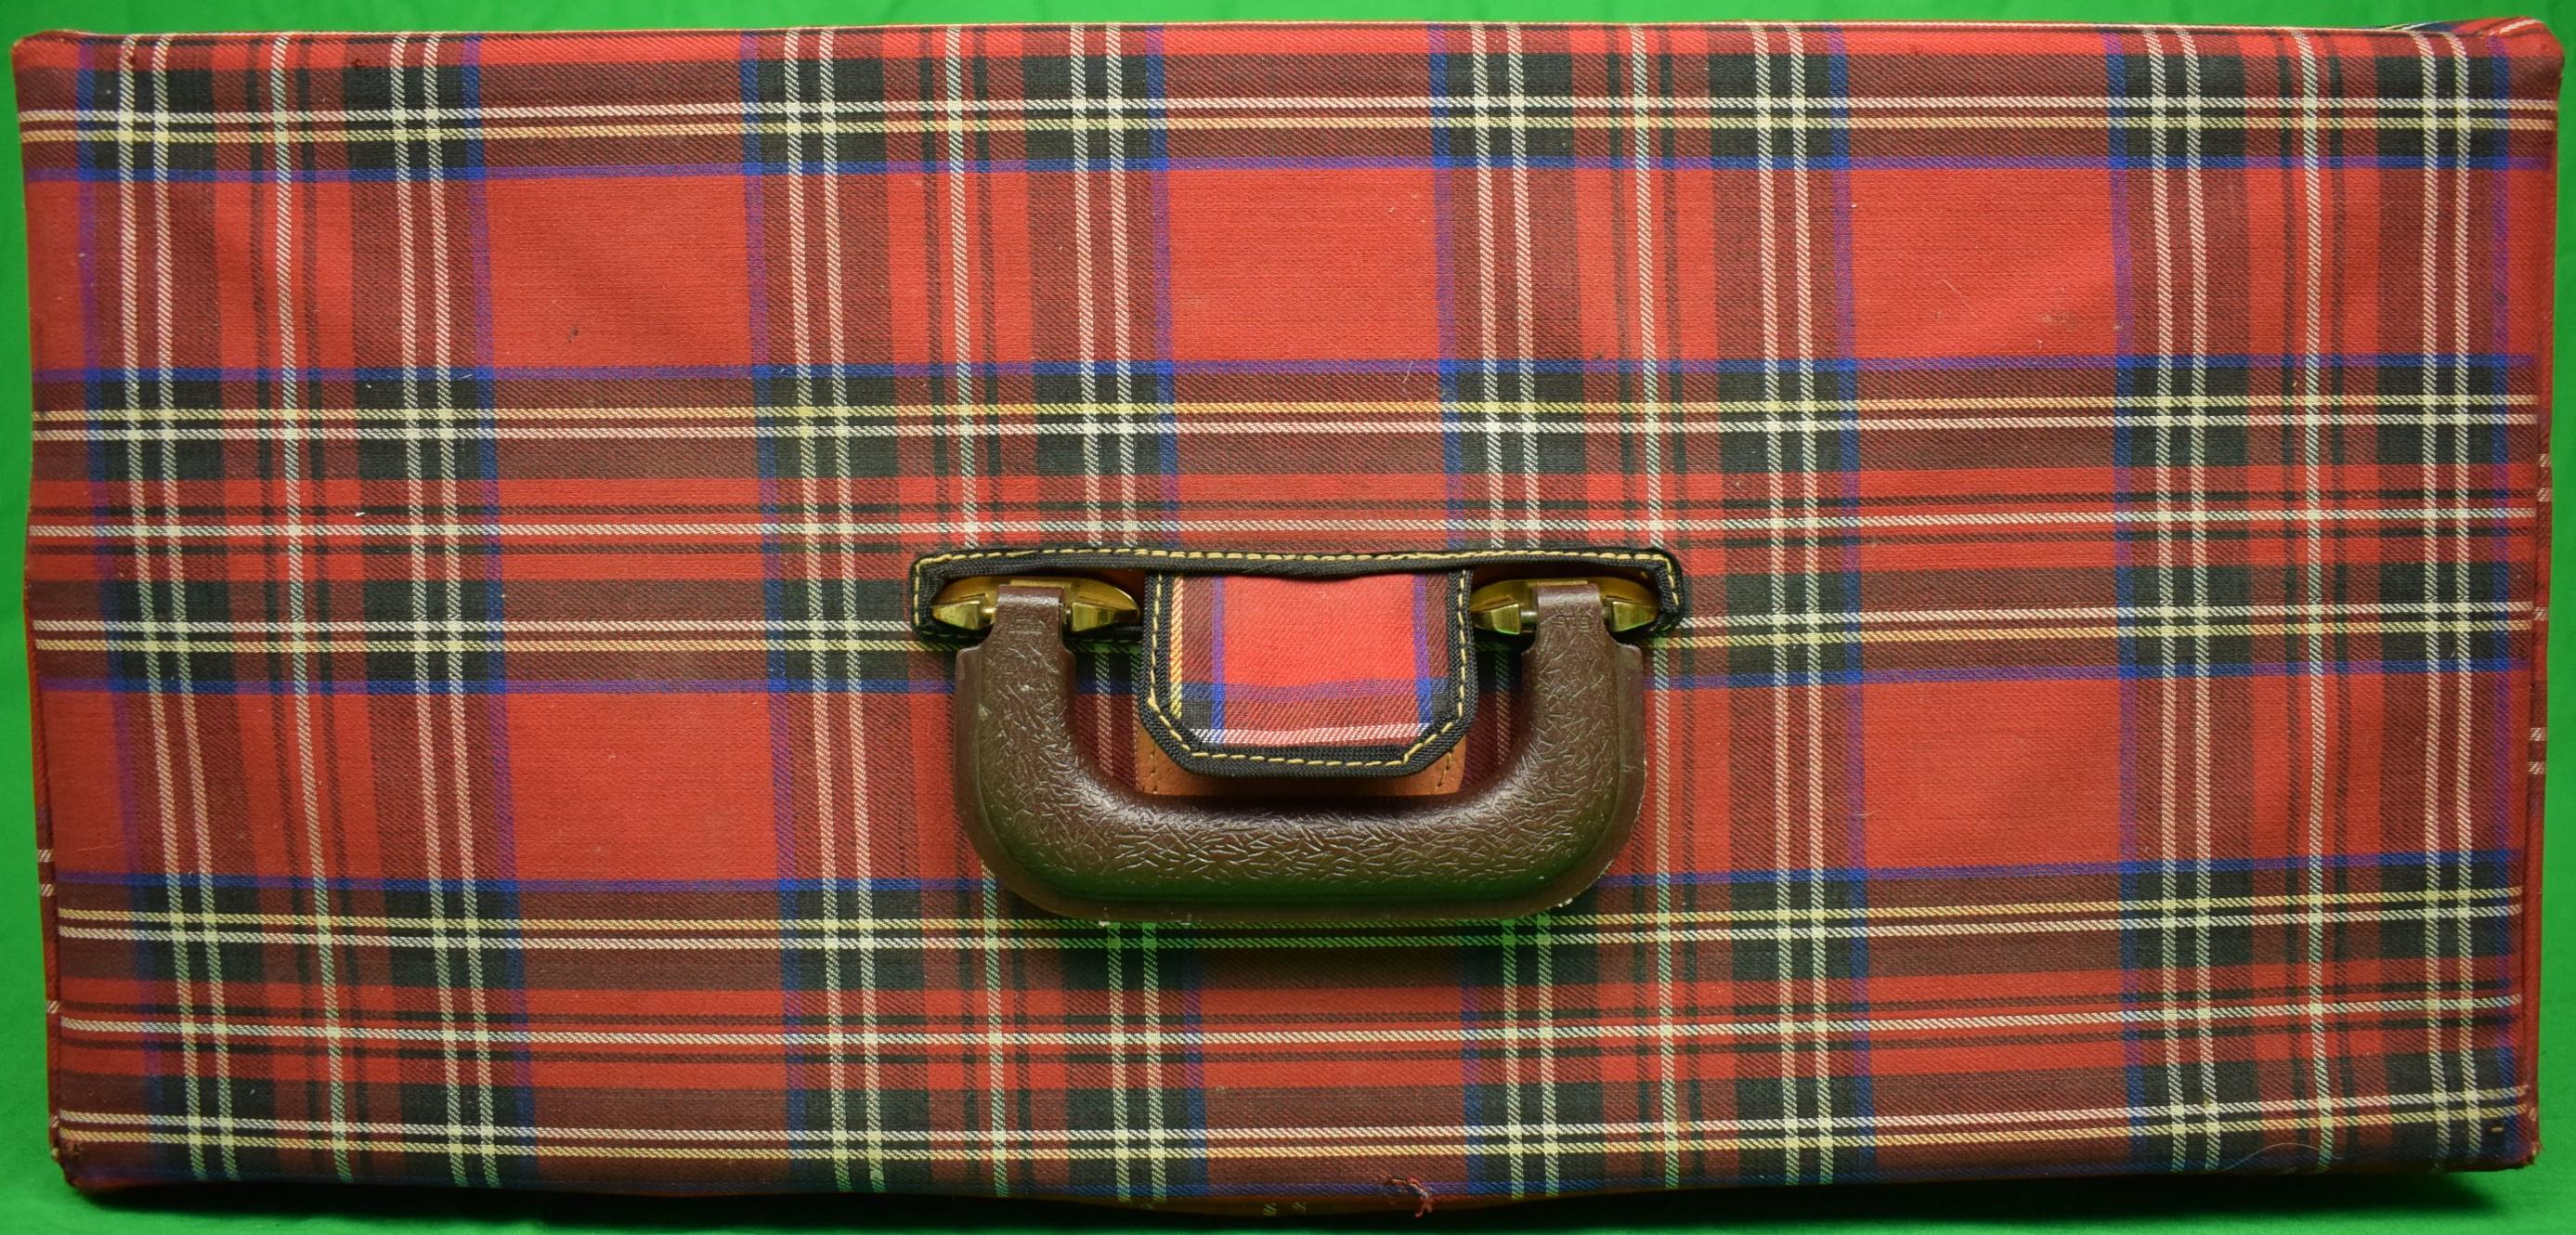 Abercrombie & Fitch Deluxe Mahogany Tackle Box w/ Royal Stewart Tartan Cover For Sale 13